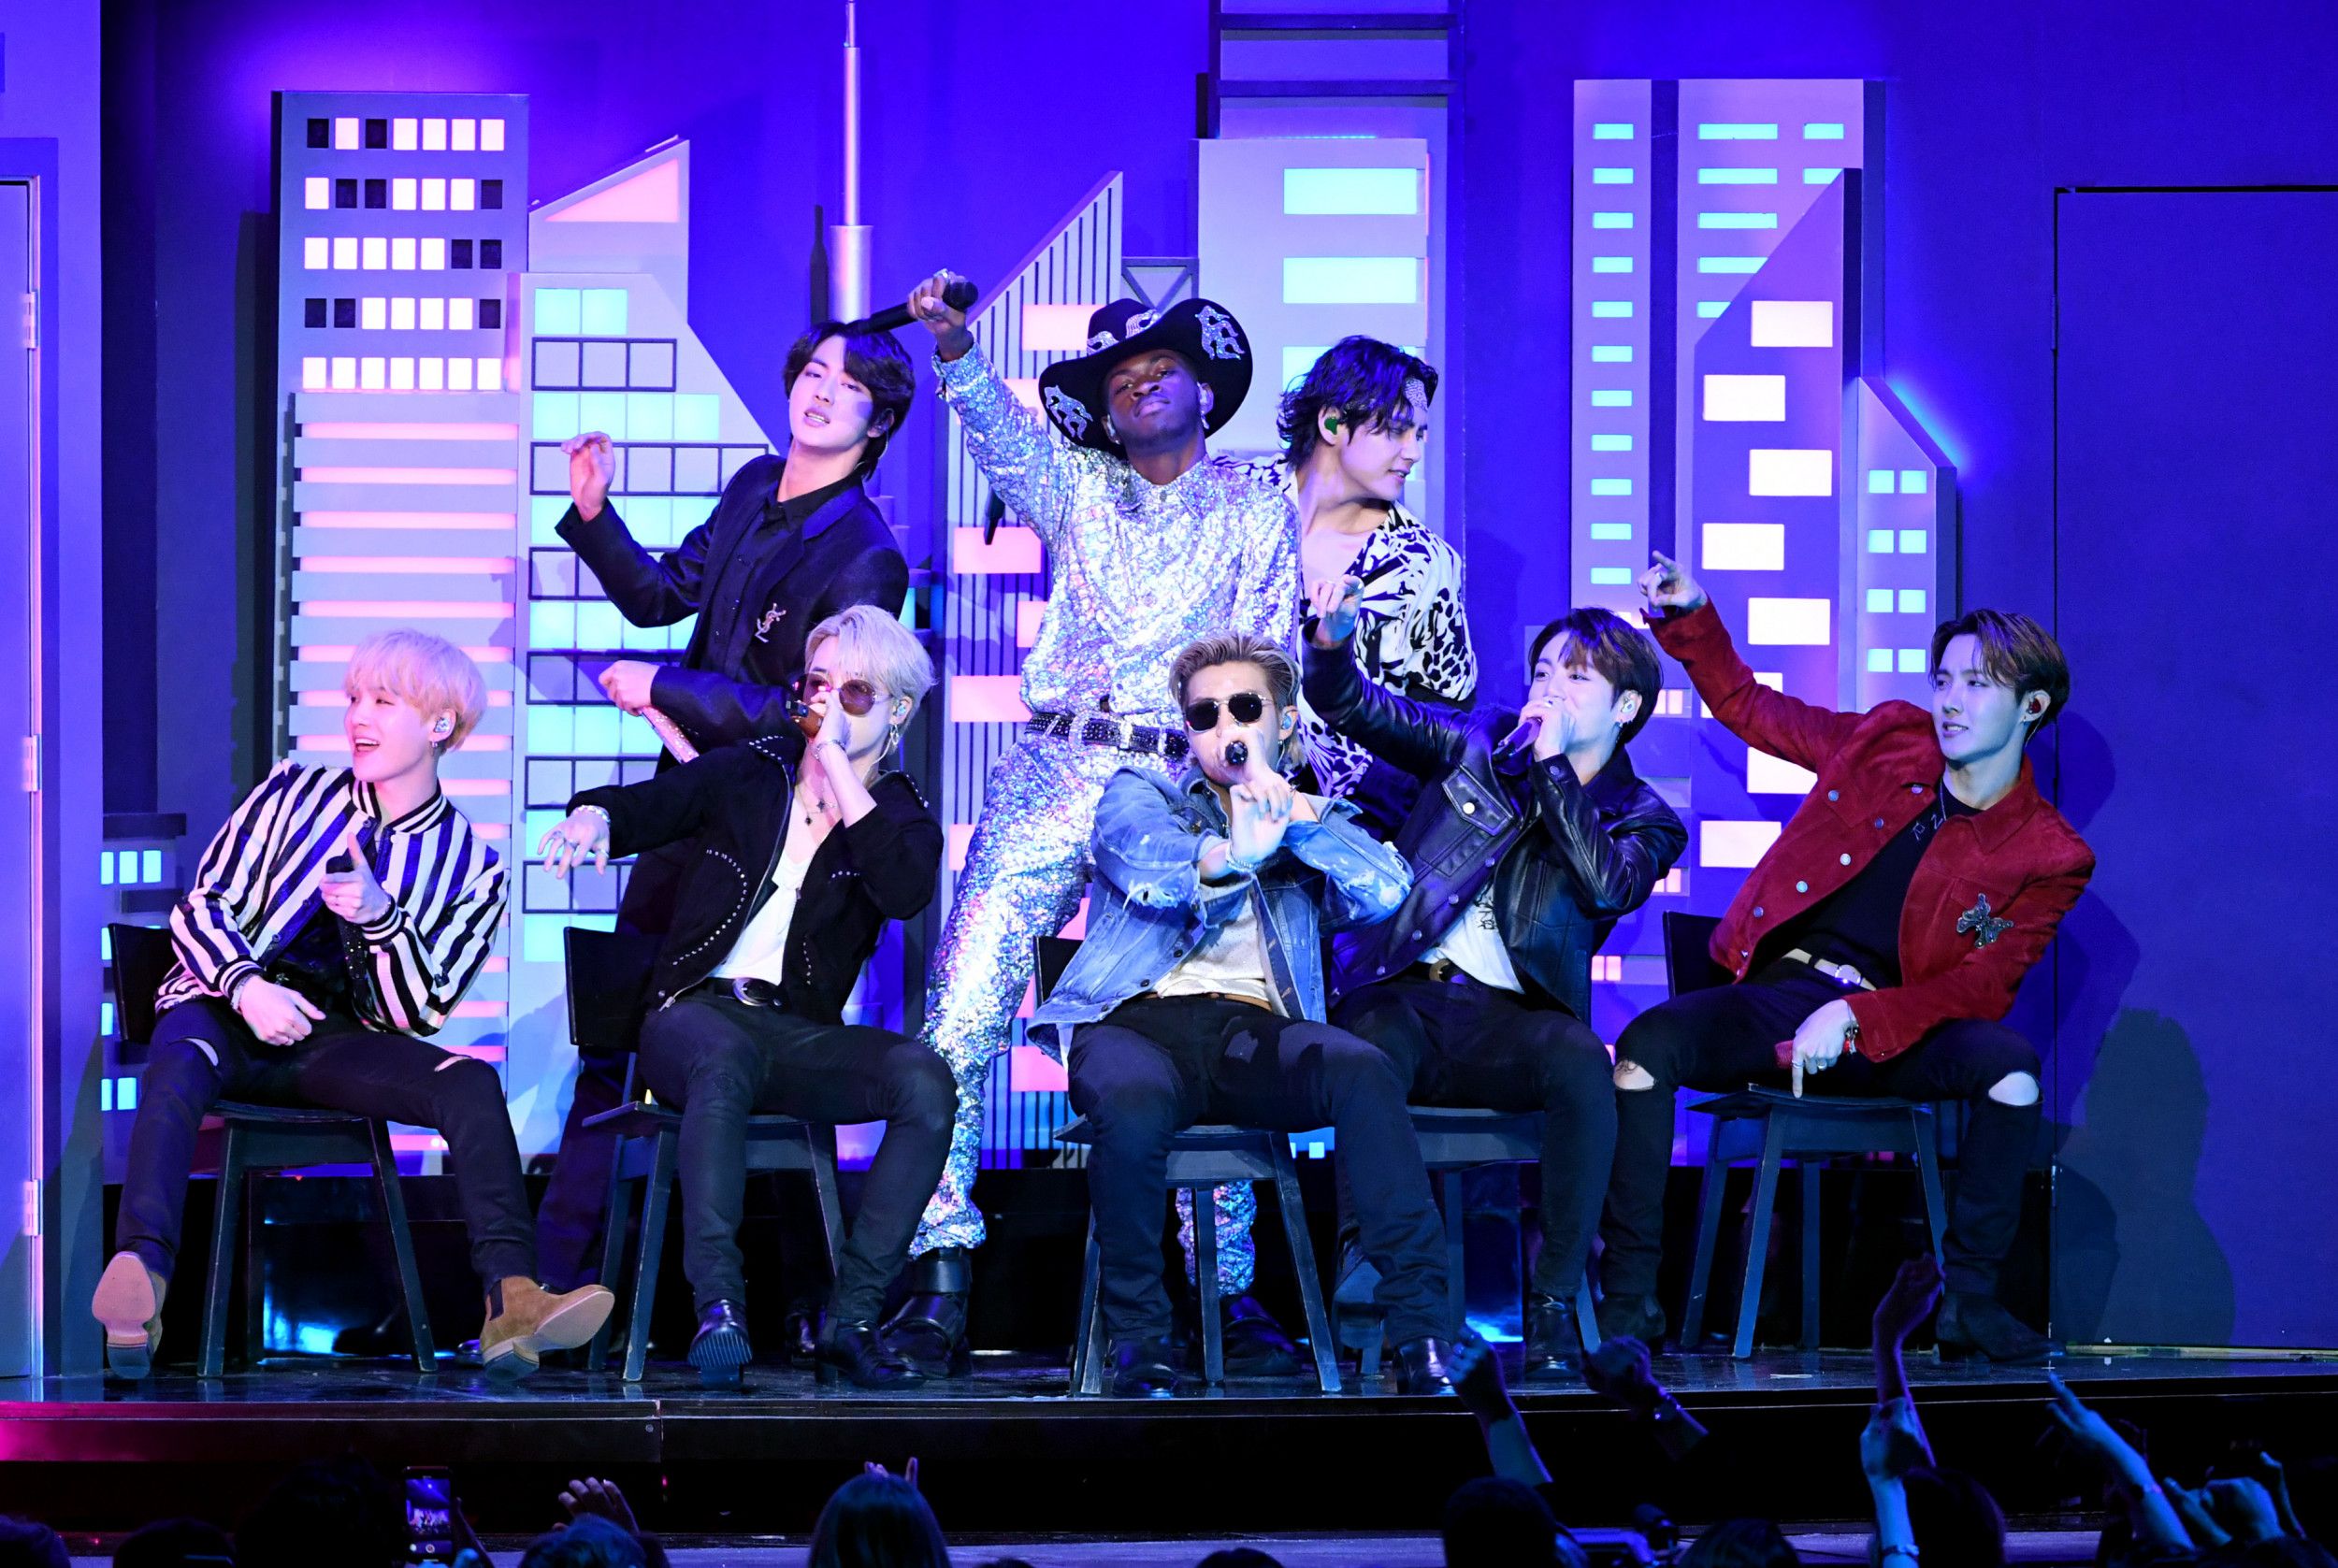 BTSxCorden Trends After BTS Performs 'Black Swan' For the First